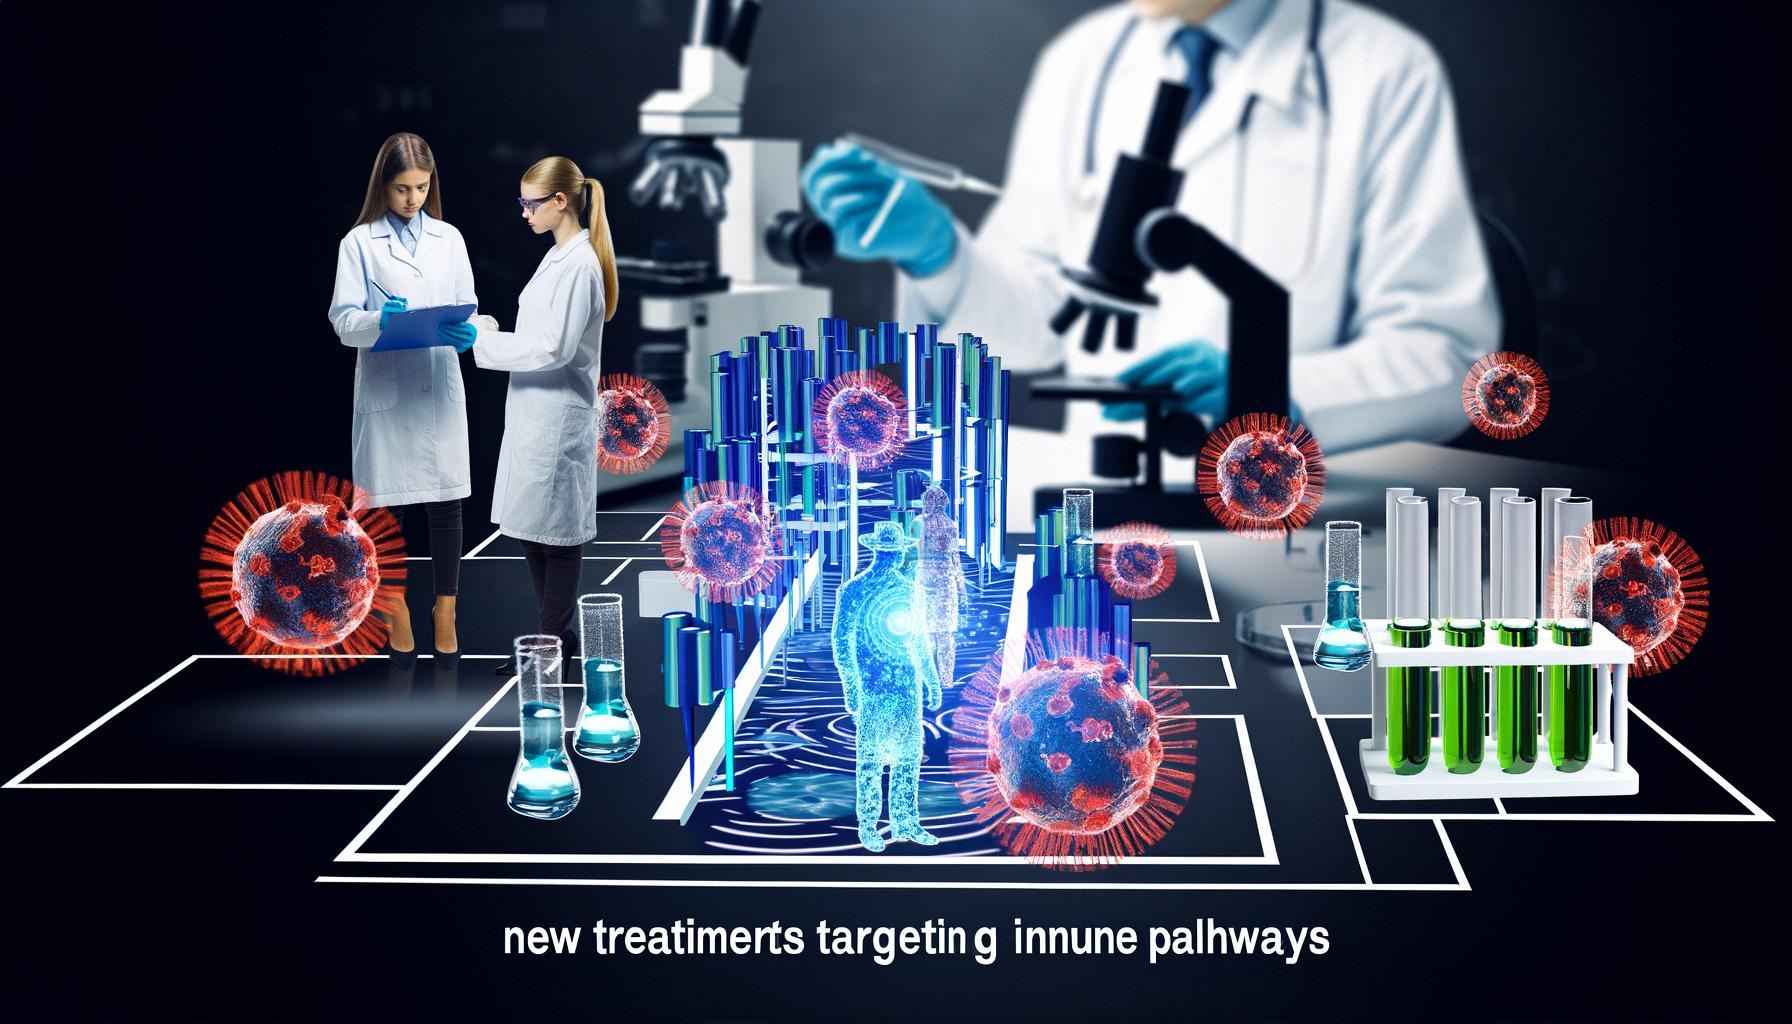 Innovations in immune-modulating treatments offer targeted therapies for serious diseases.